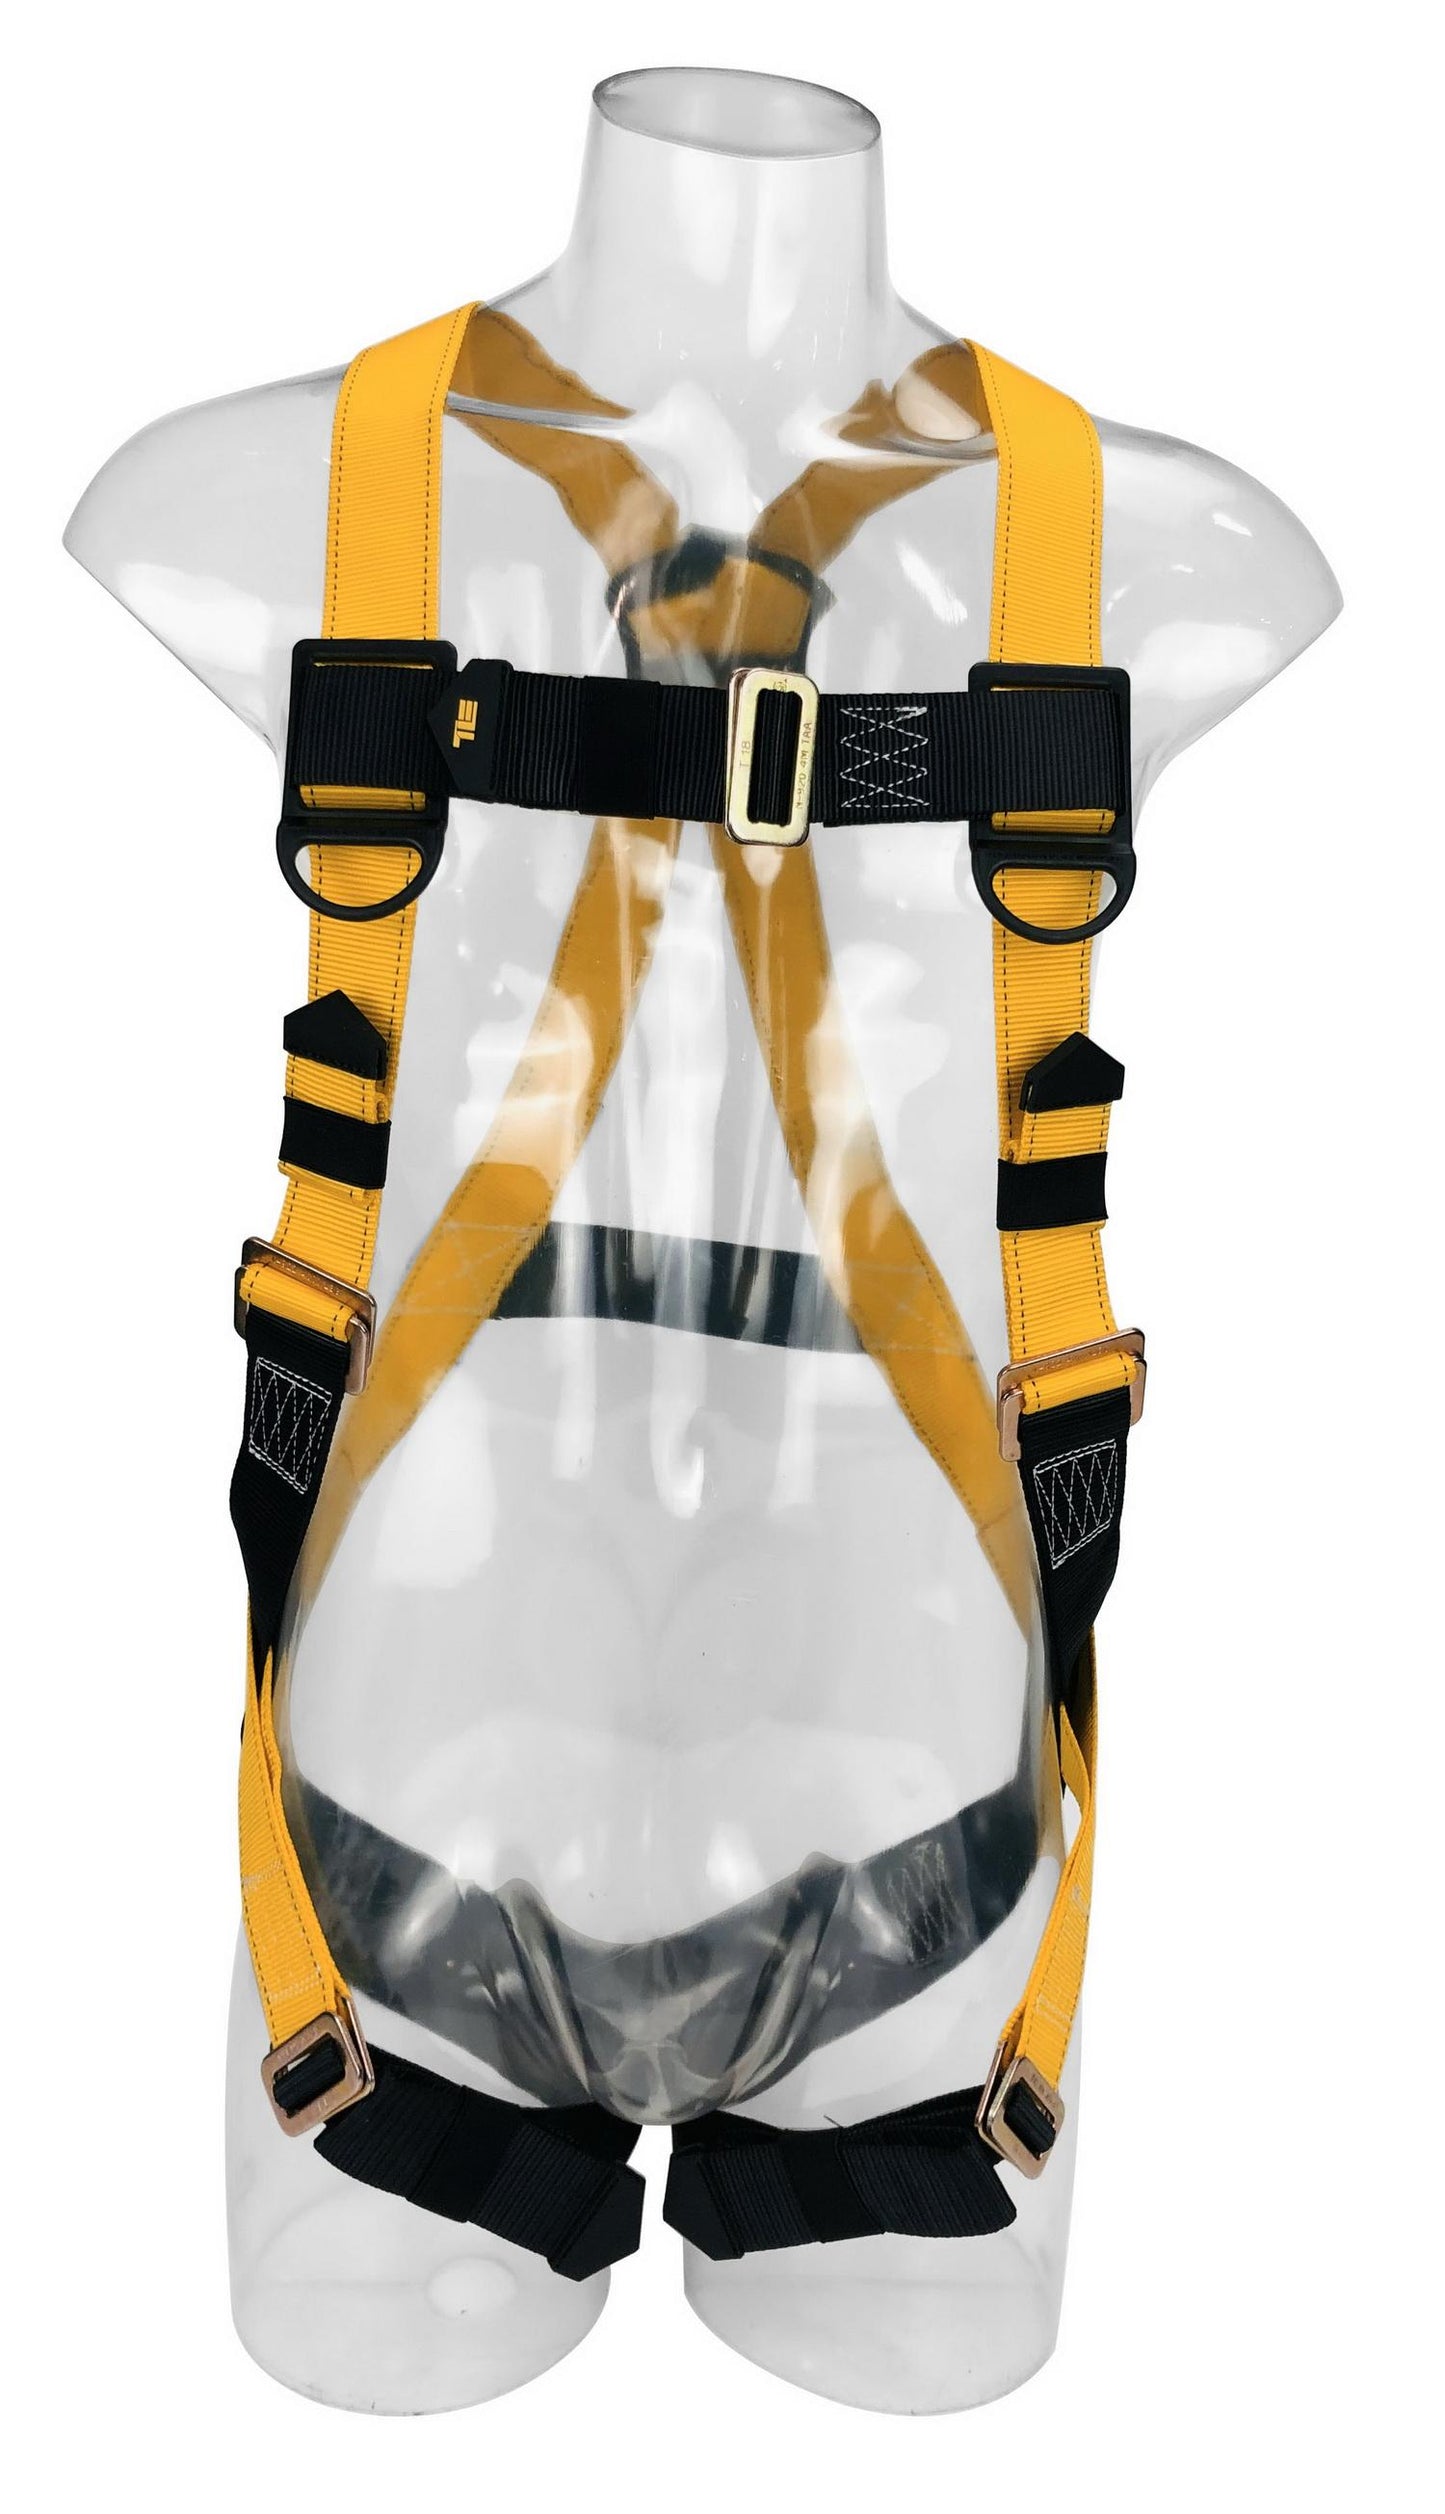 FULL BODY REFLECTOR SAFETY HARNESS